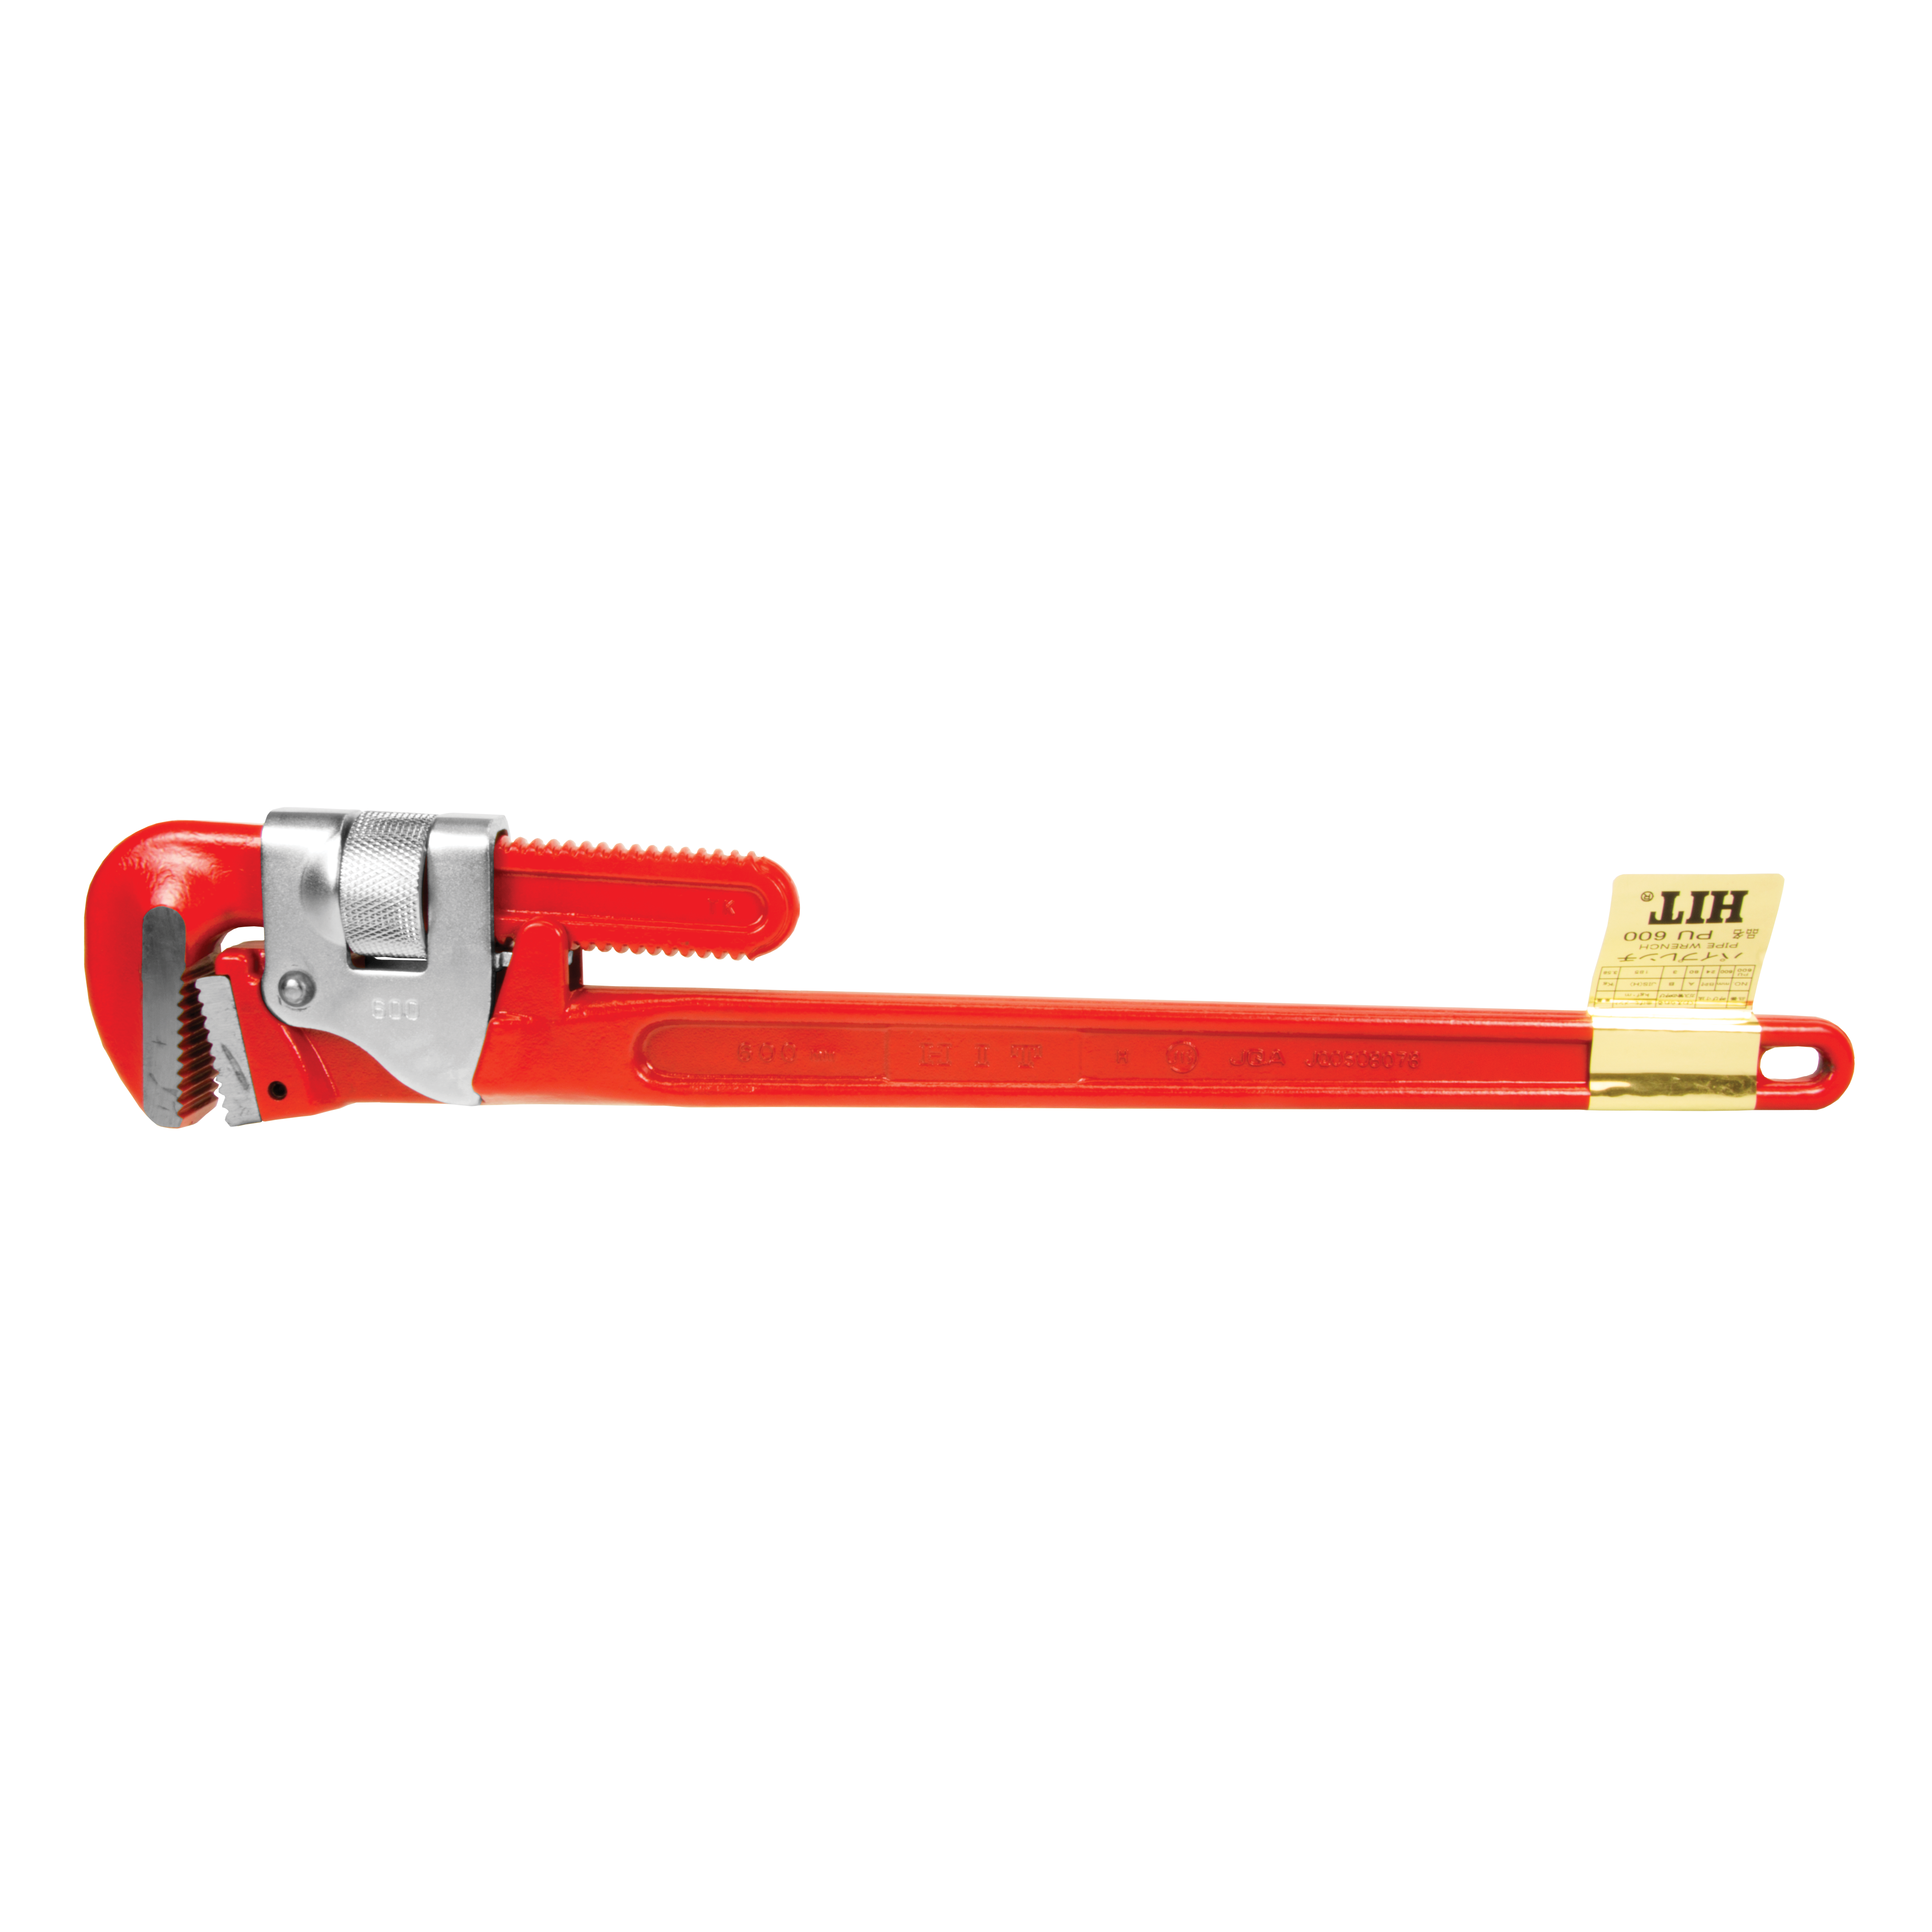 #PU-1200mm DROP FORGE STEEL PIPE WRENCH - 188mm CAPACITY